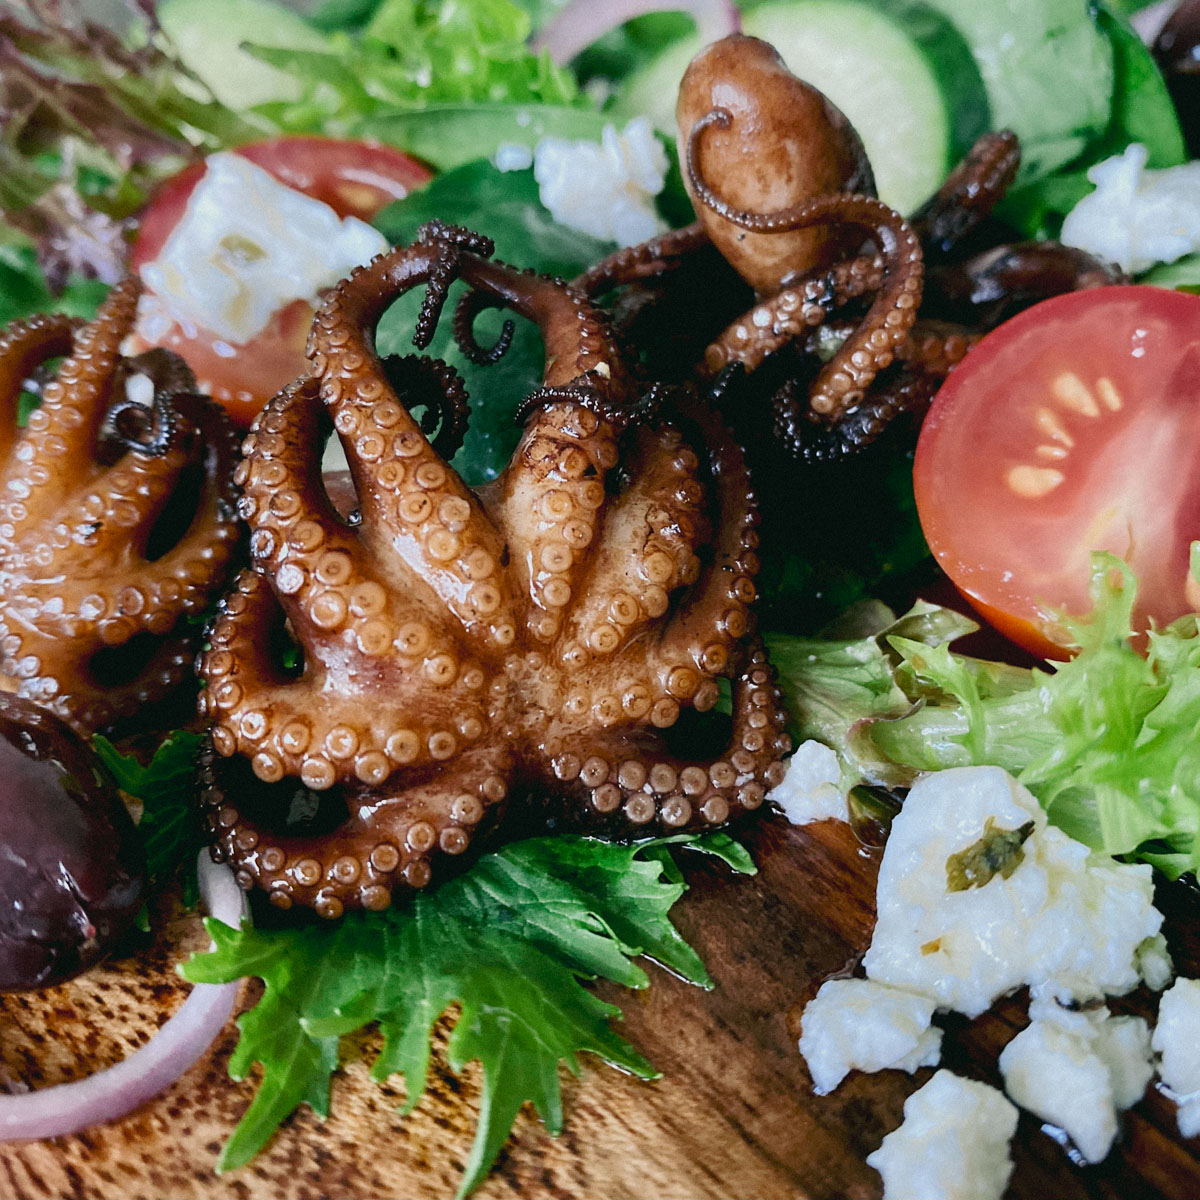 fried octopus in a salad with fetta cheese tomato and lettuce - Pompano Seafood Deli